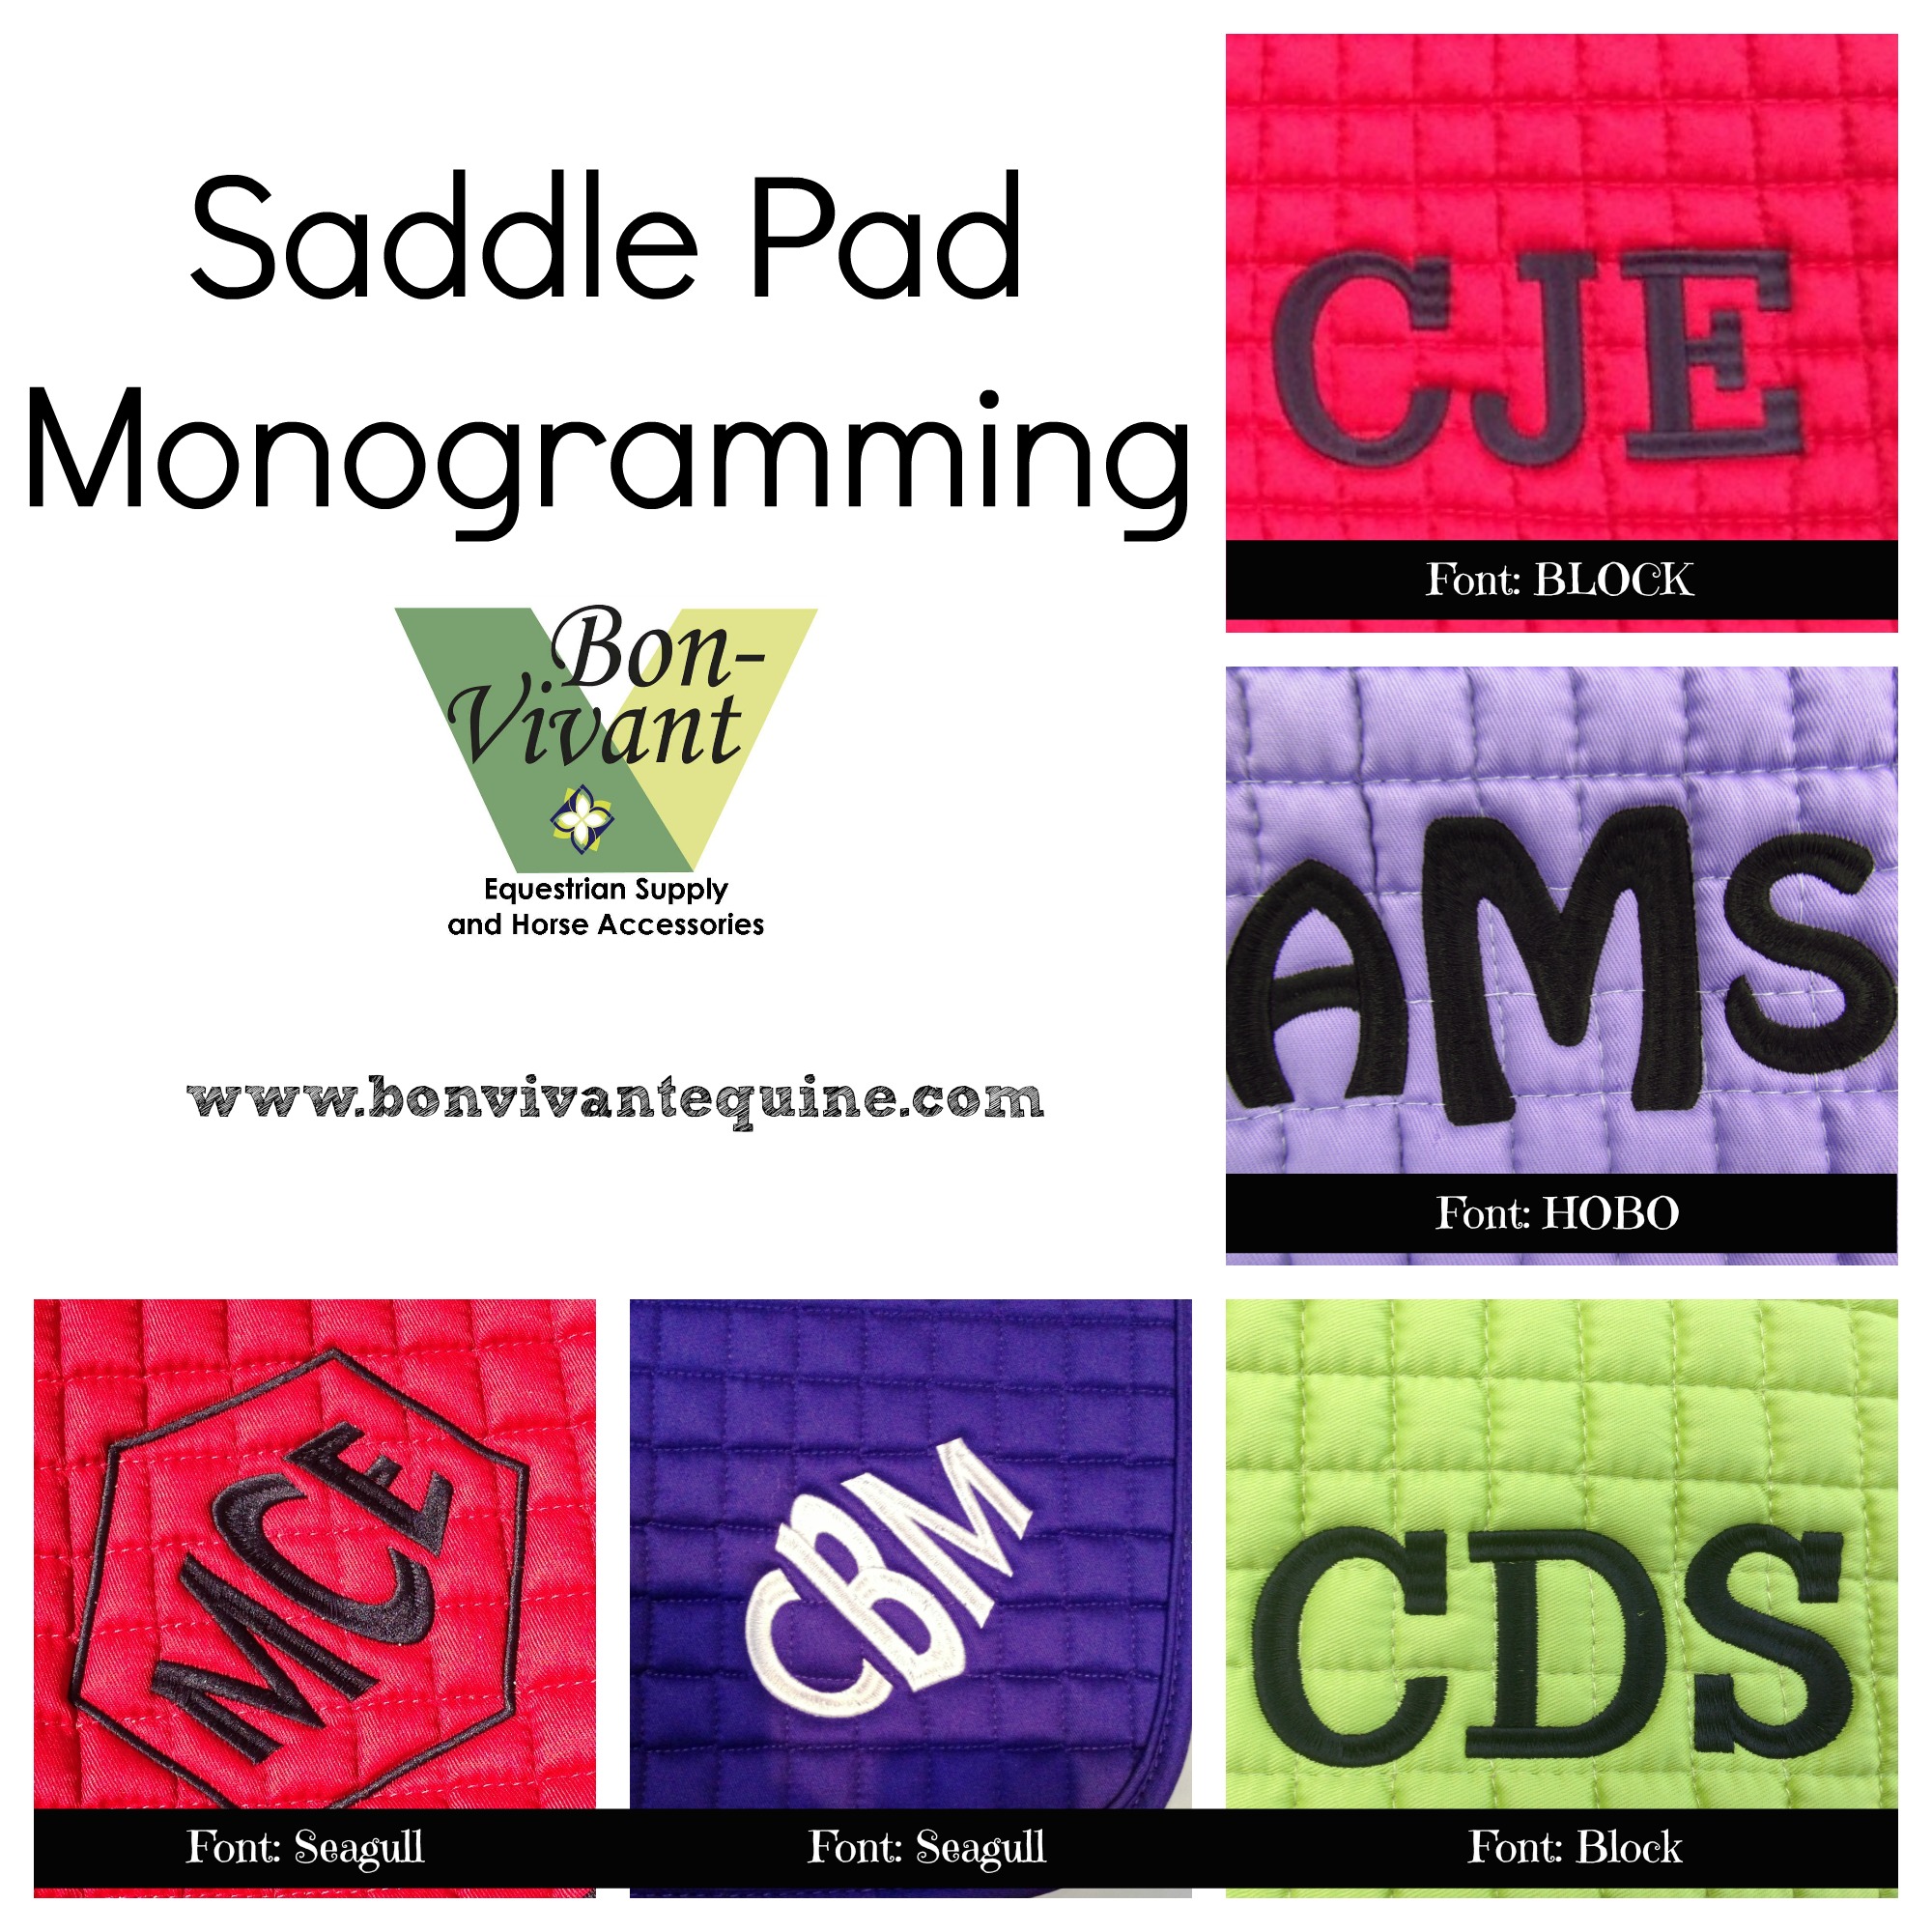 saddle-pad-monogramming-lots-of-colors-and-styles.jpg